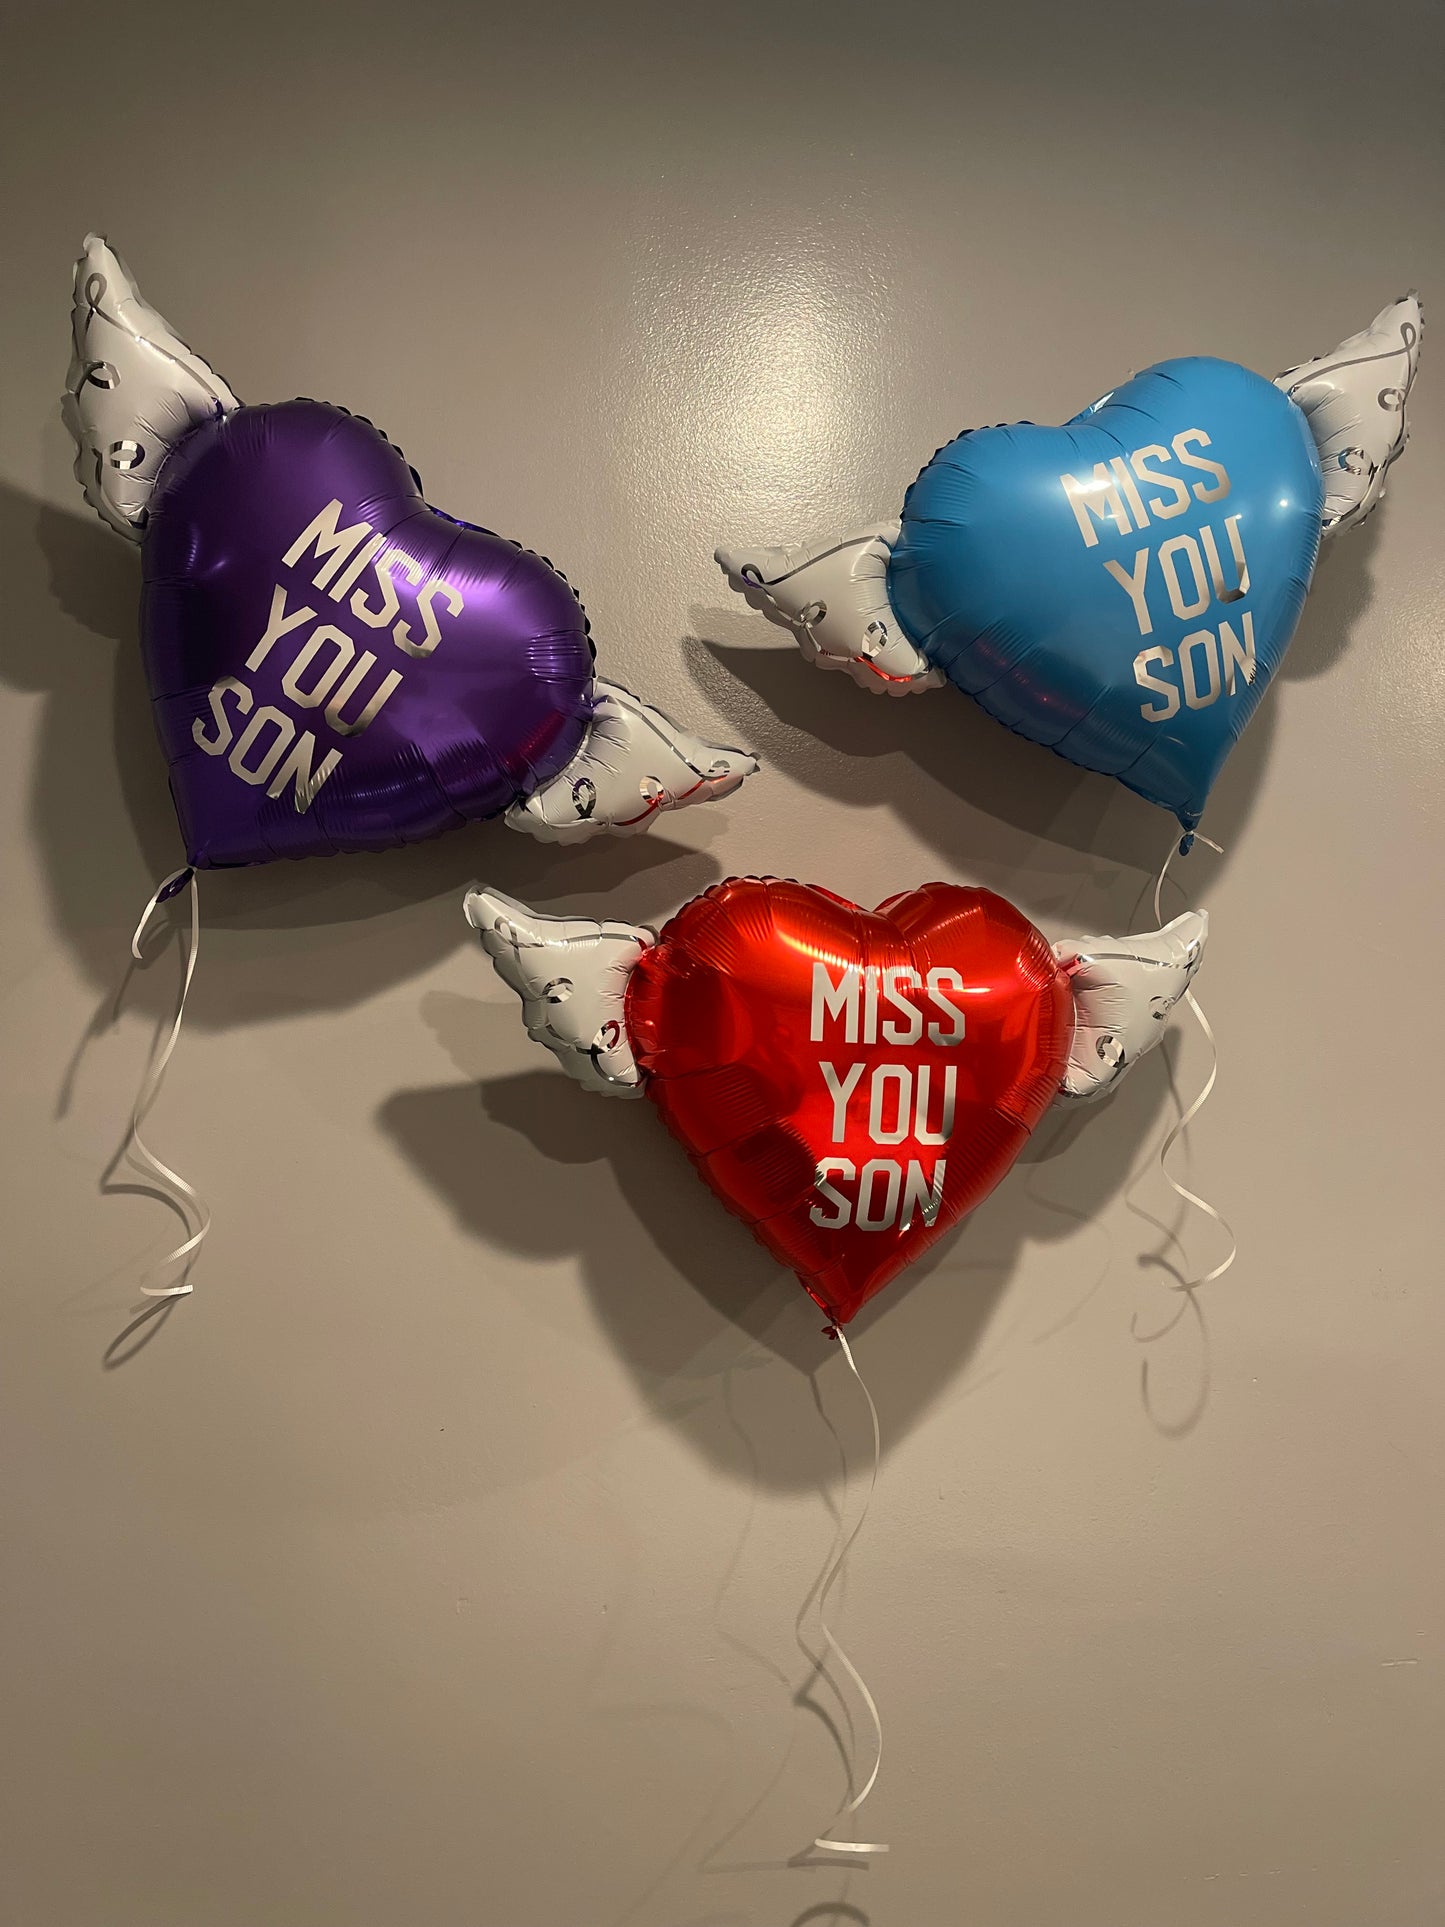 Miss You Son Heavenly Balloons ™ Heart Shaped with angel wings (Purple, Blue & Red)